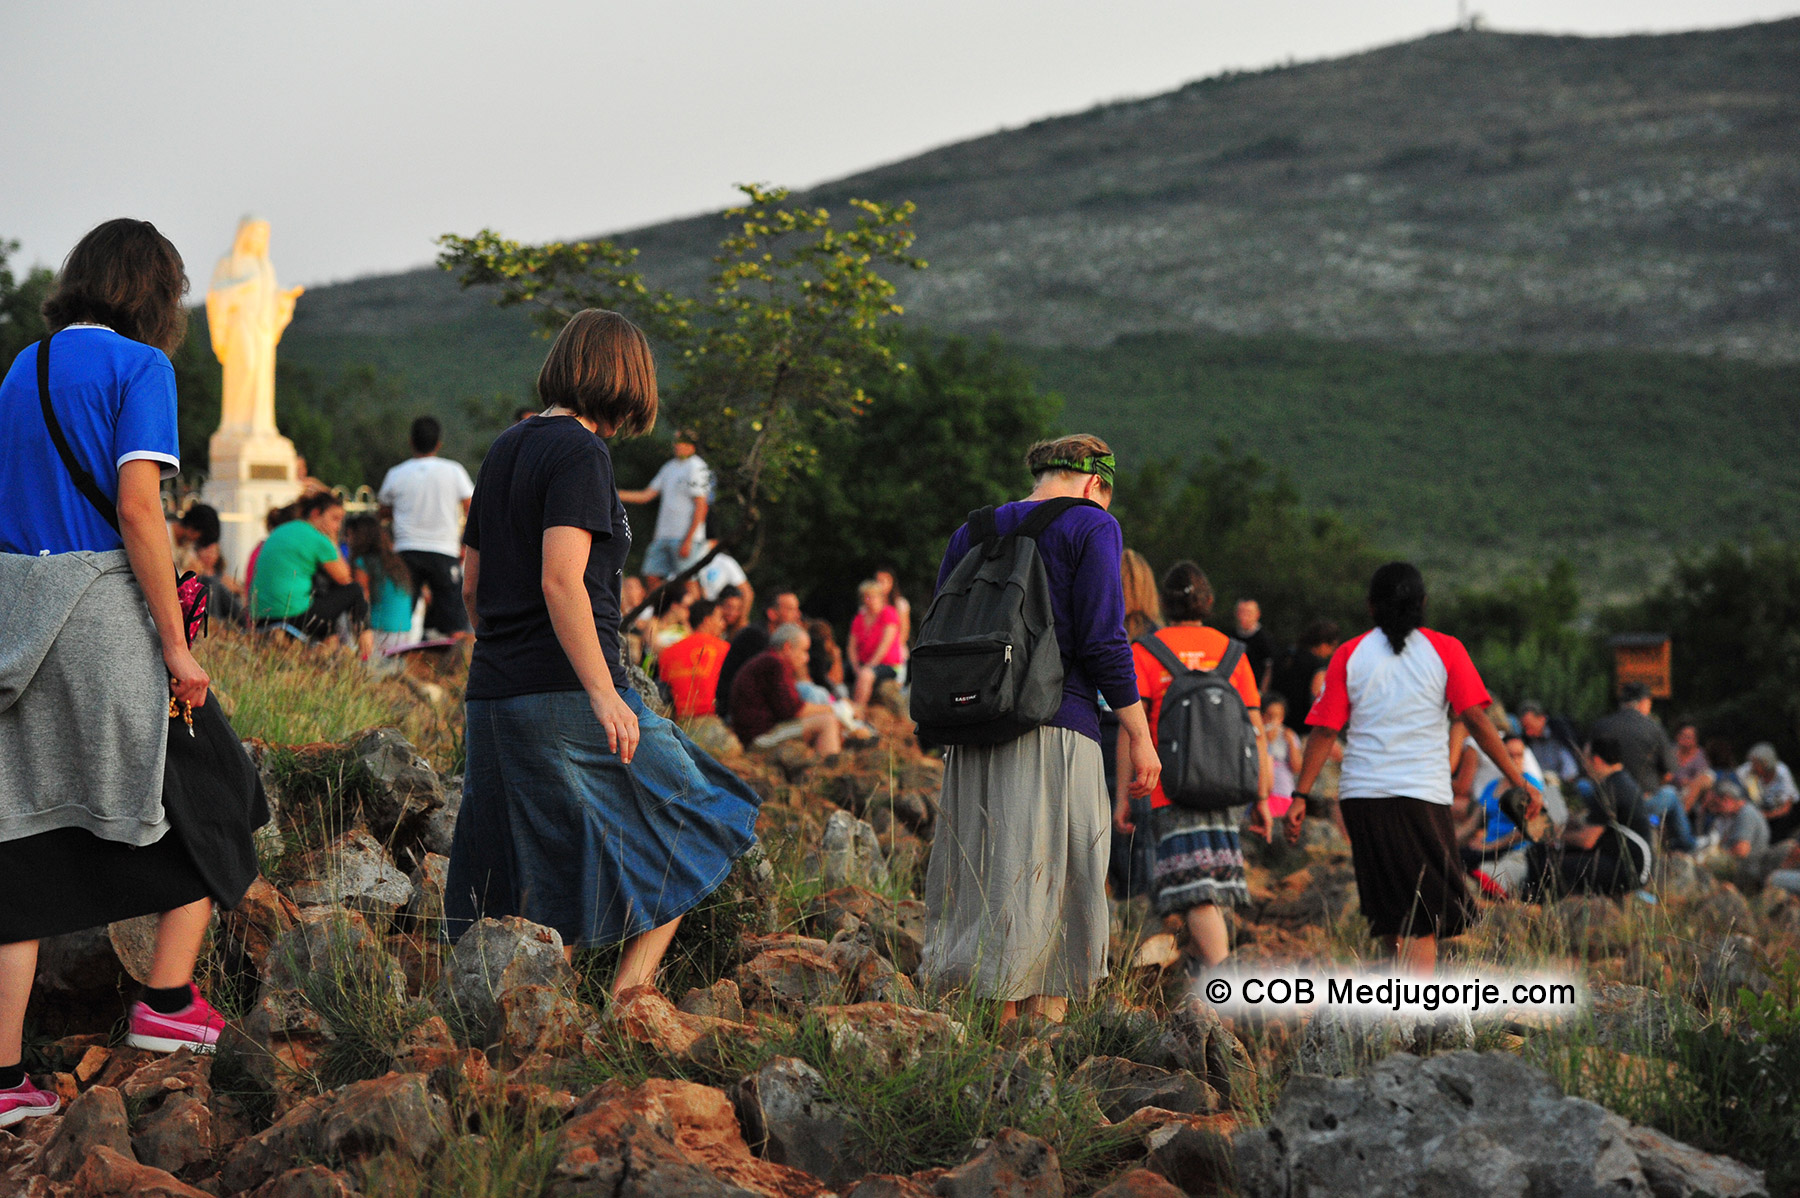 Pilgrims in Medjugorje at Ivan's apparition August 4, 2014